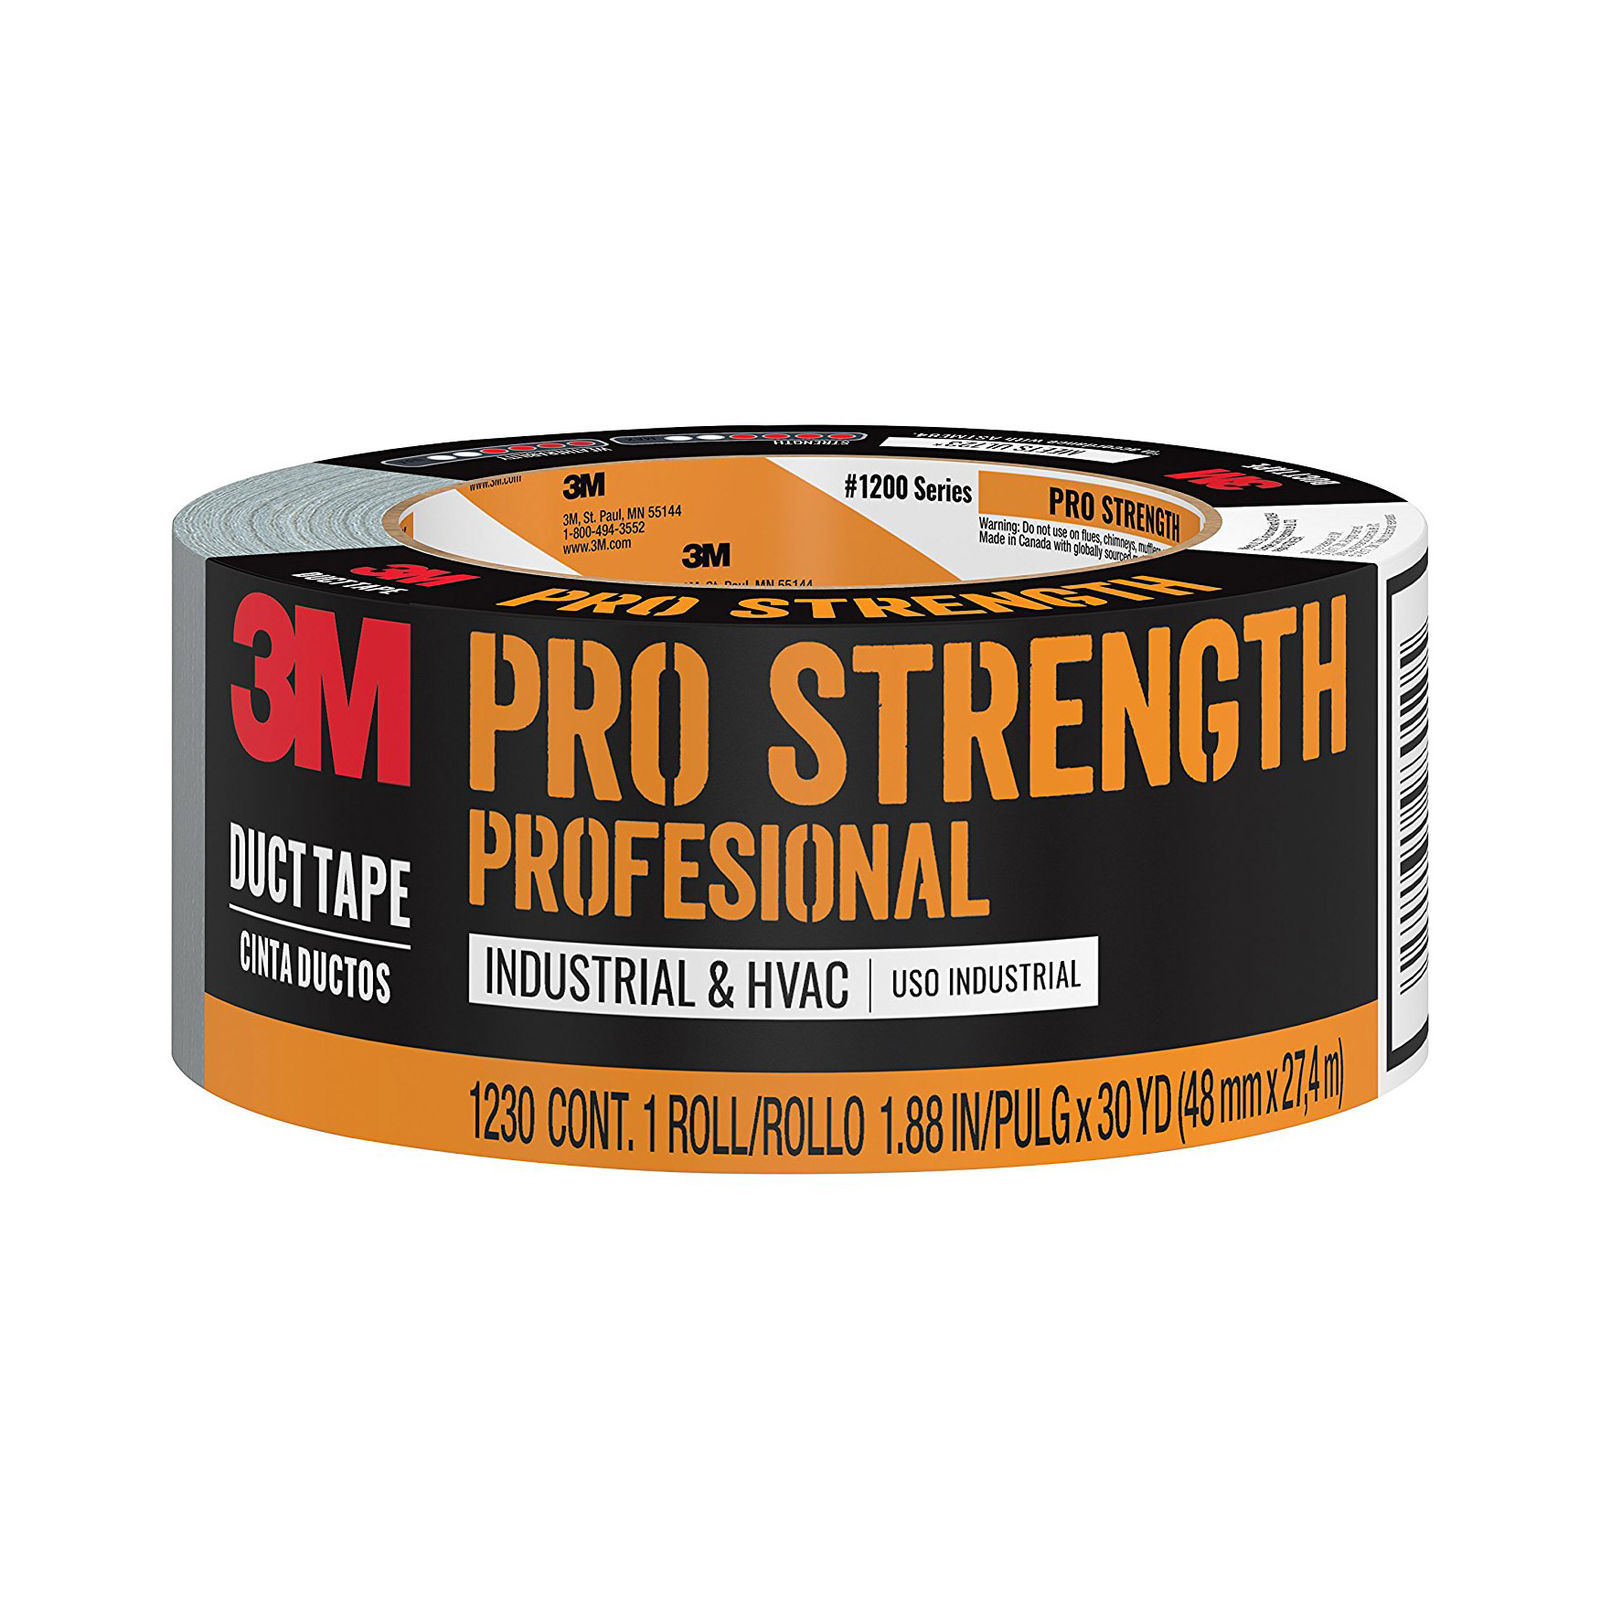 3M Pro Strength Duct Tape, 1230-C, 1.88 Inches by 30 Yards